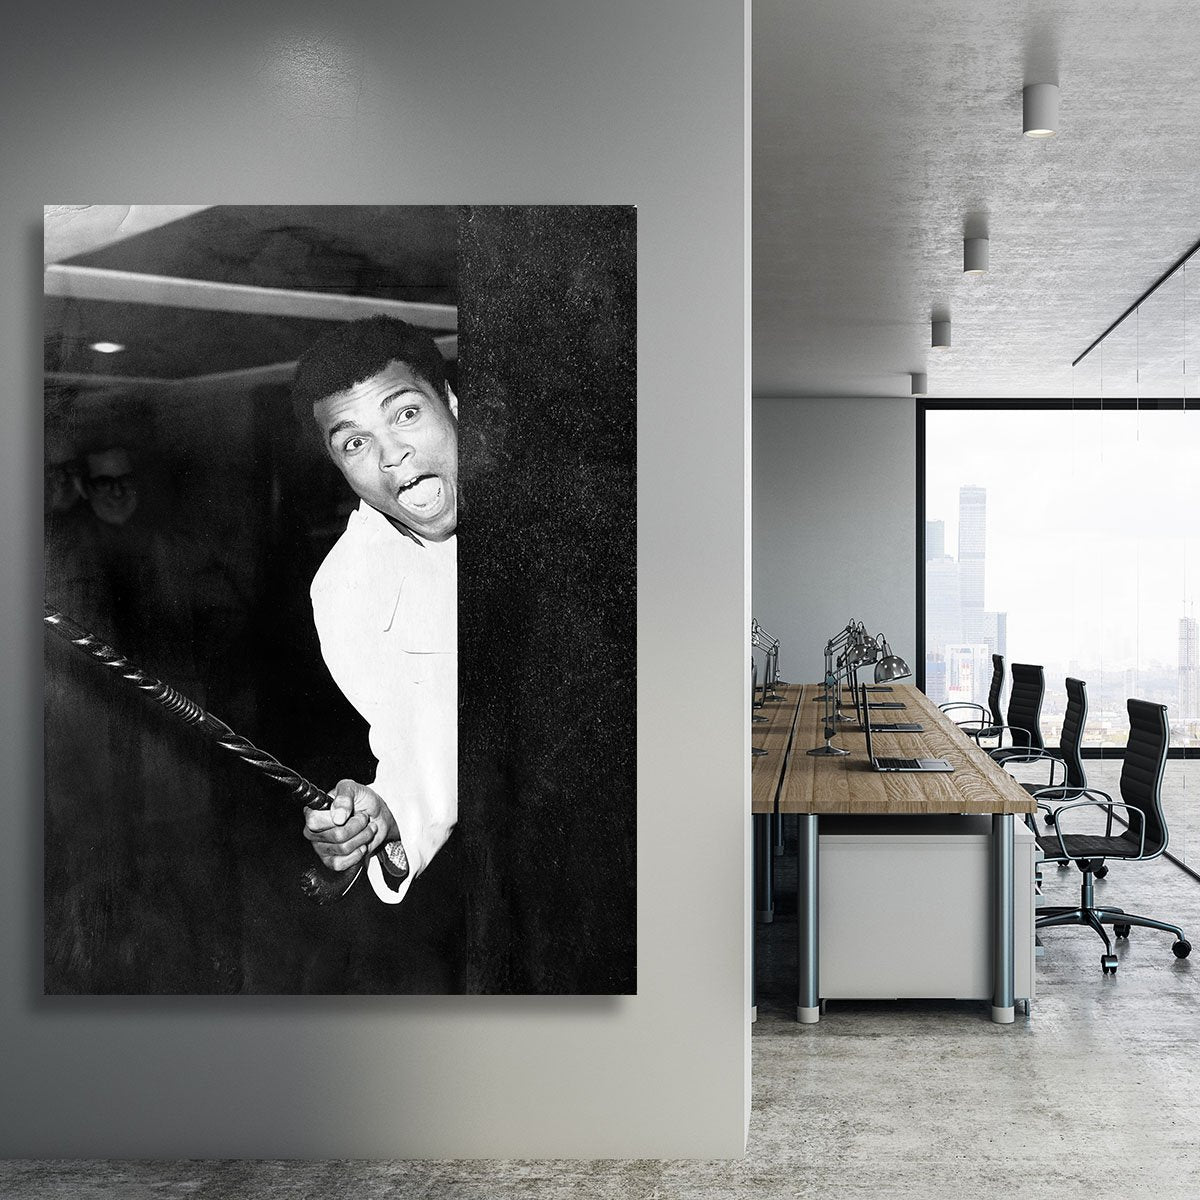 Muhammad Ali larking about at Heathrow Canvas Print or Poster